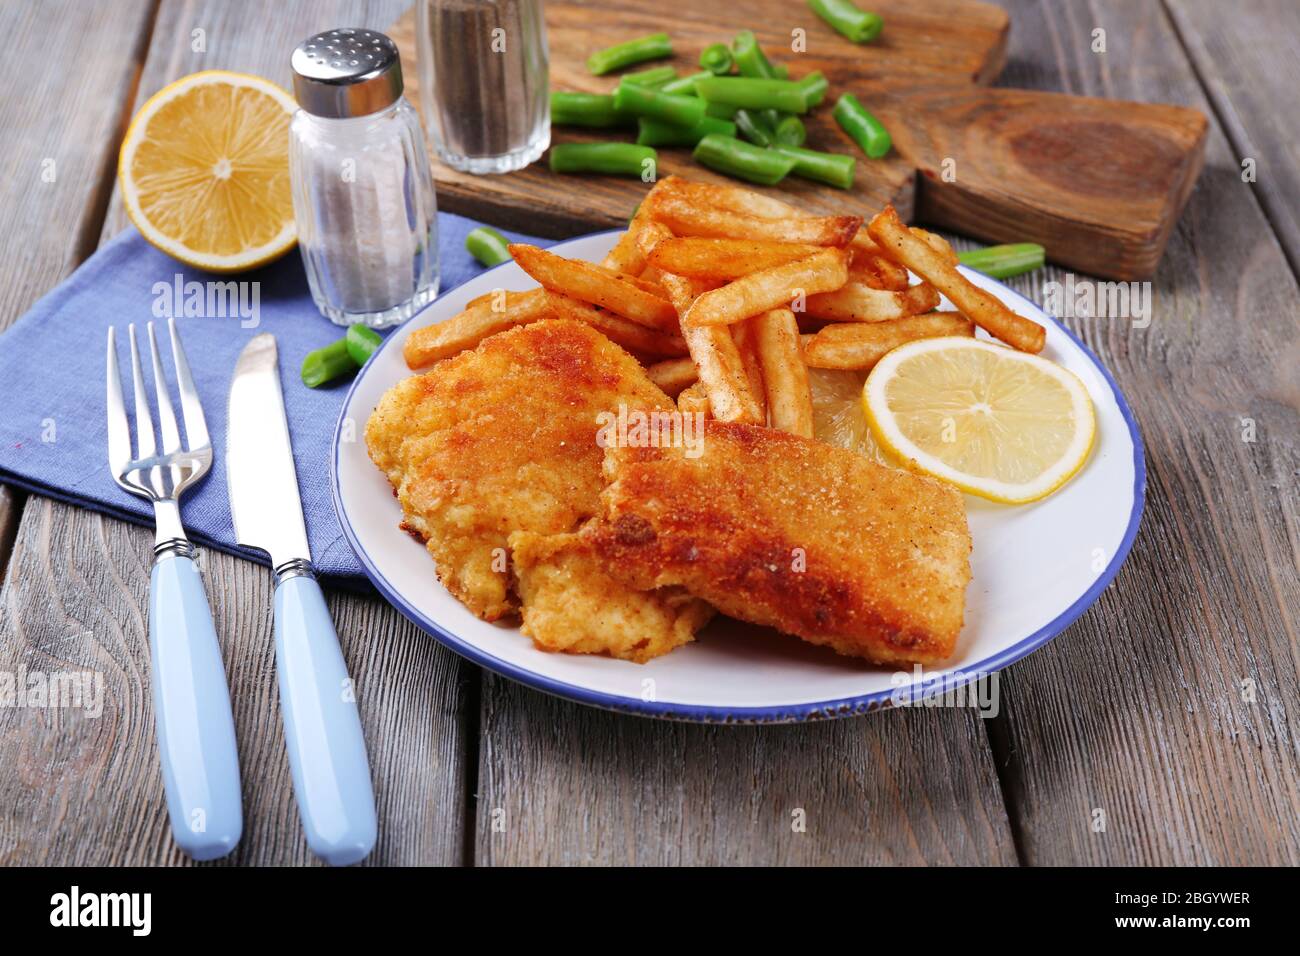 Breaded fried fish fillets and potatoes with asparagus and sliced lemon on plate and wooden planks background Stock Photo